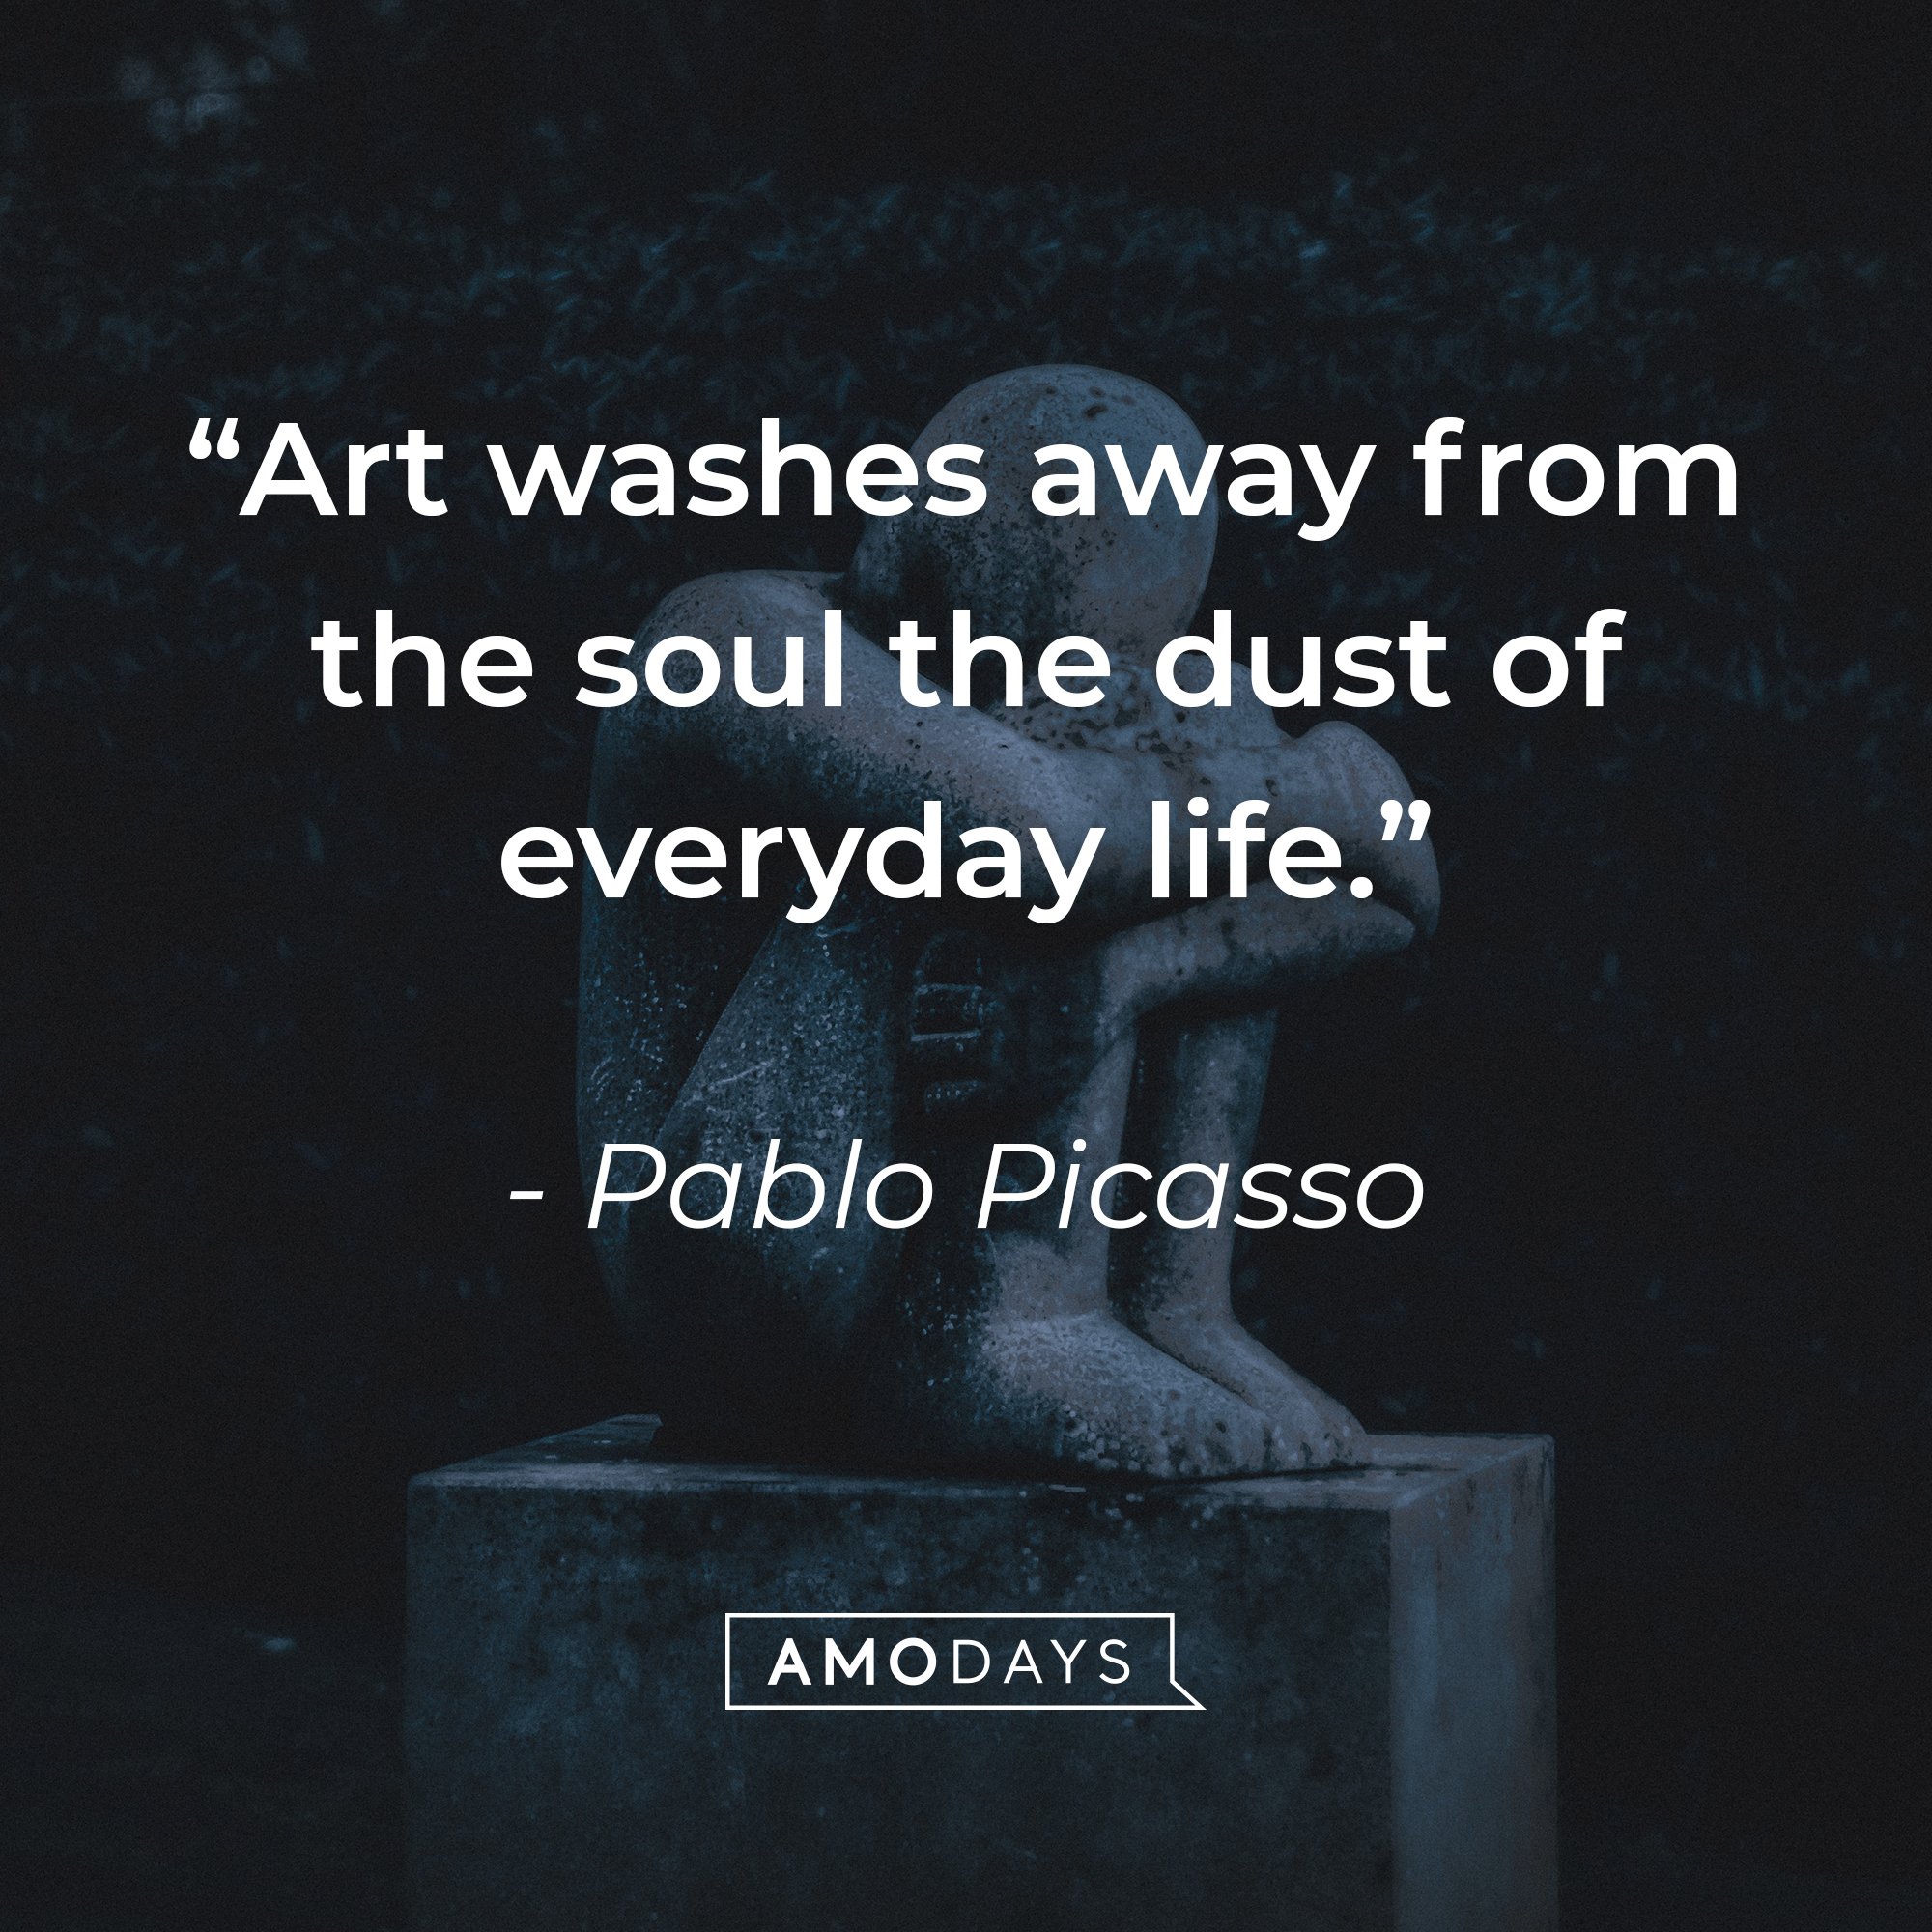 Pablo Picasso’s quote: “Art washes away from the soul the dust of everyday life.” | Image: Amodays